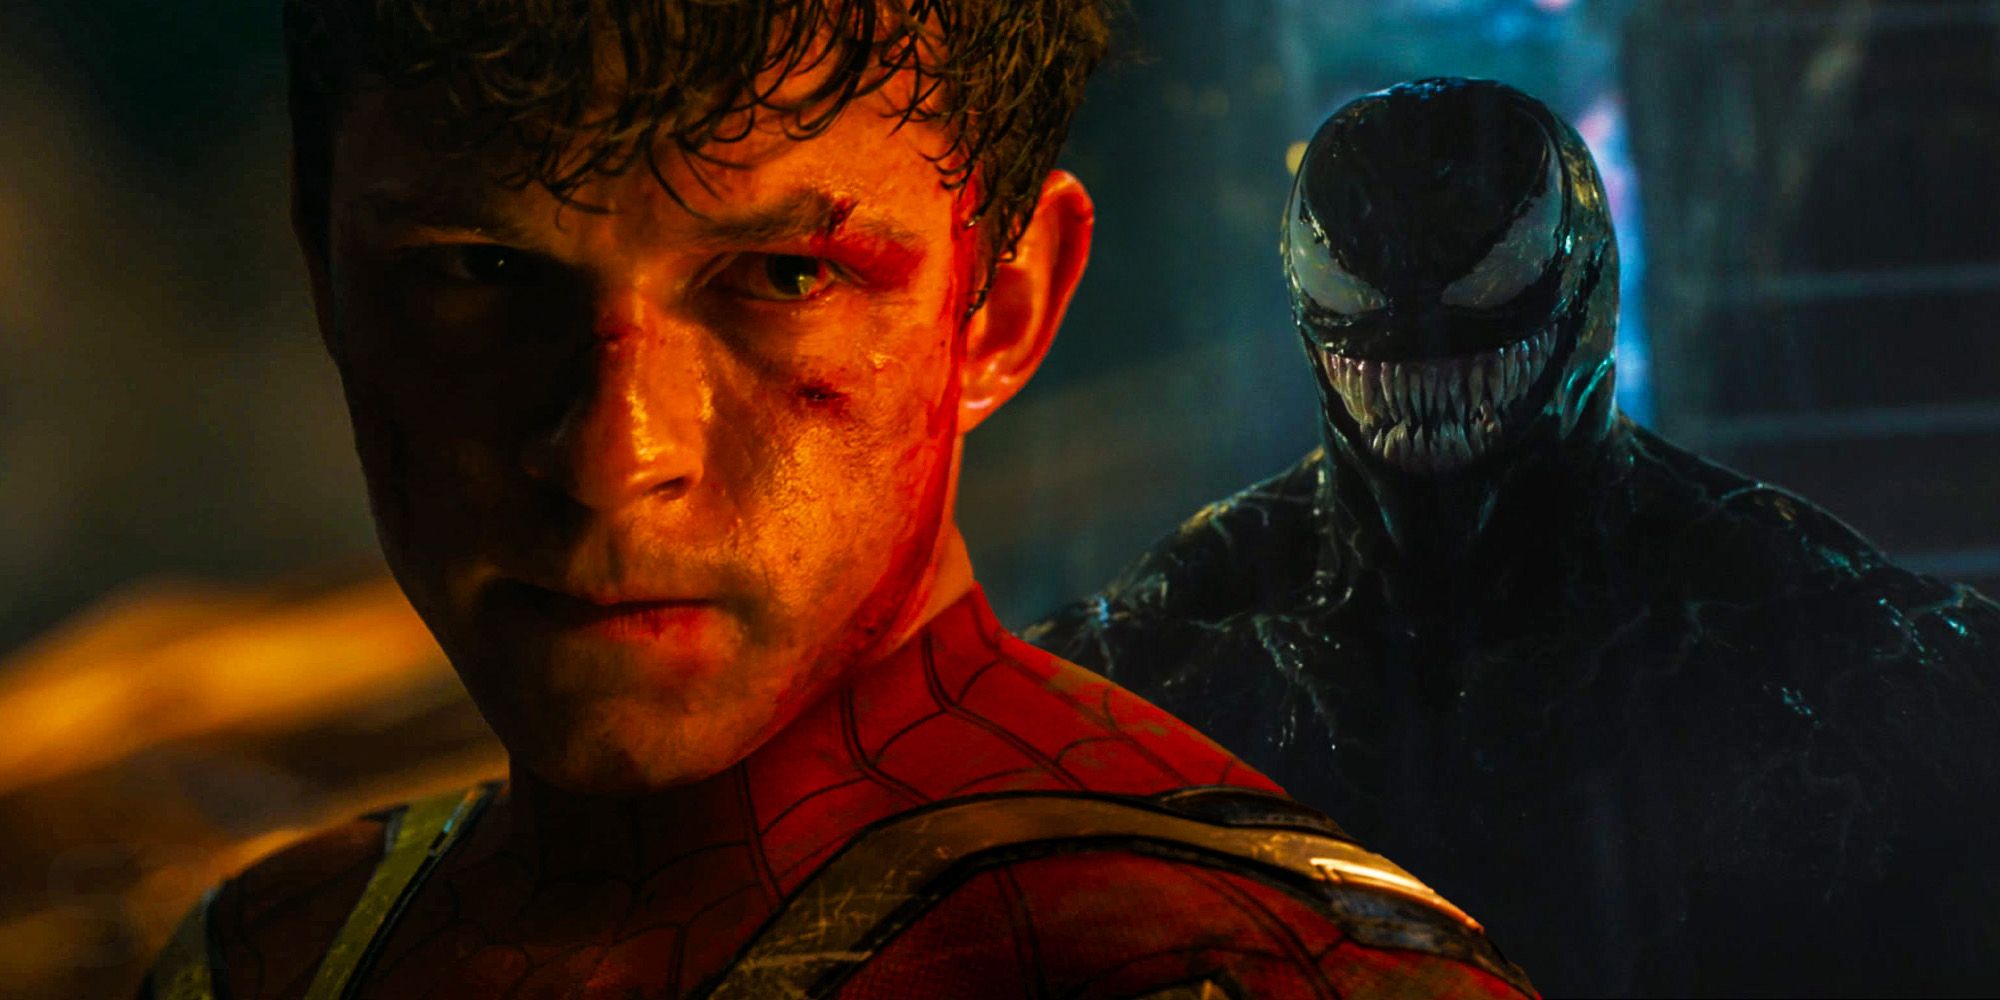 Custom image of Tom Holland in Spider-Man: No Way Home and Tom Hardy's Venom.